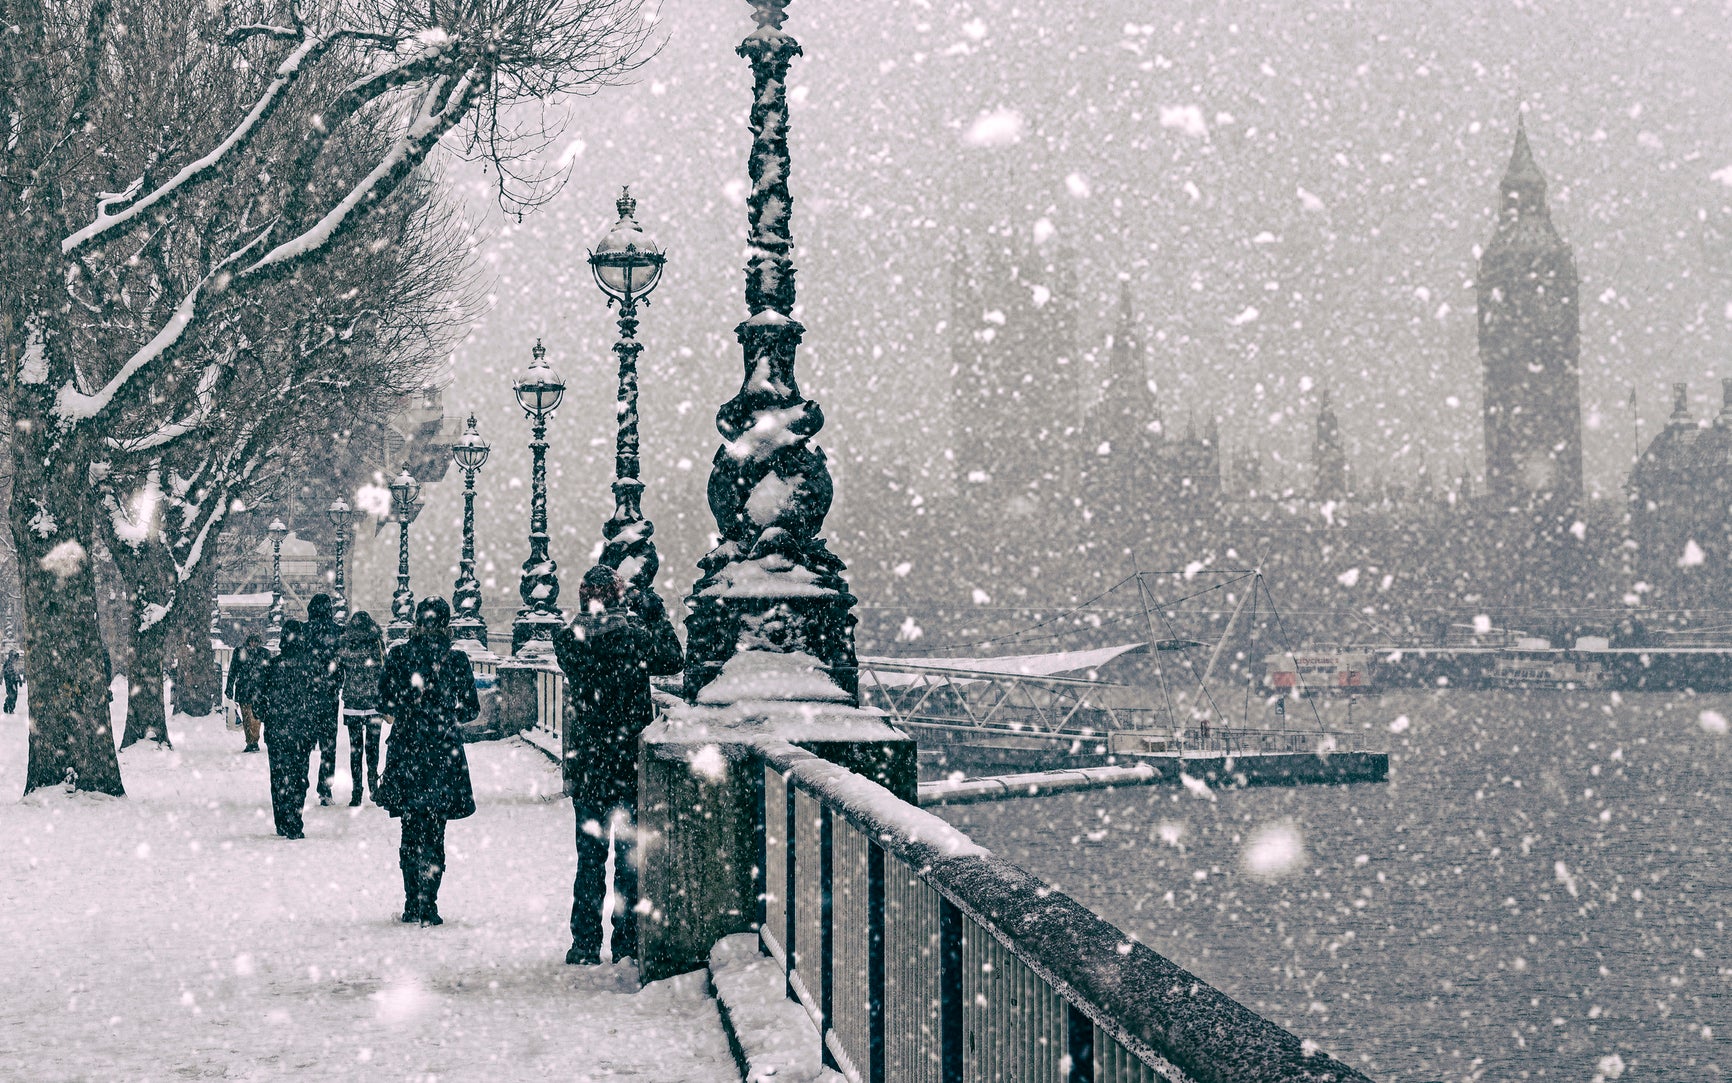 Winter along the Thames.